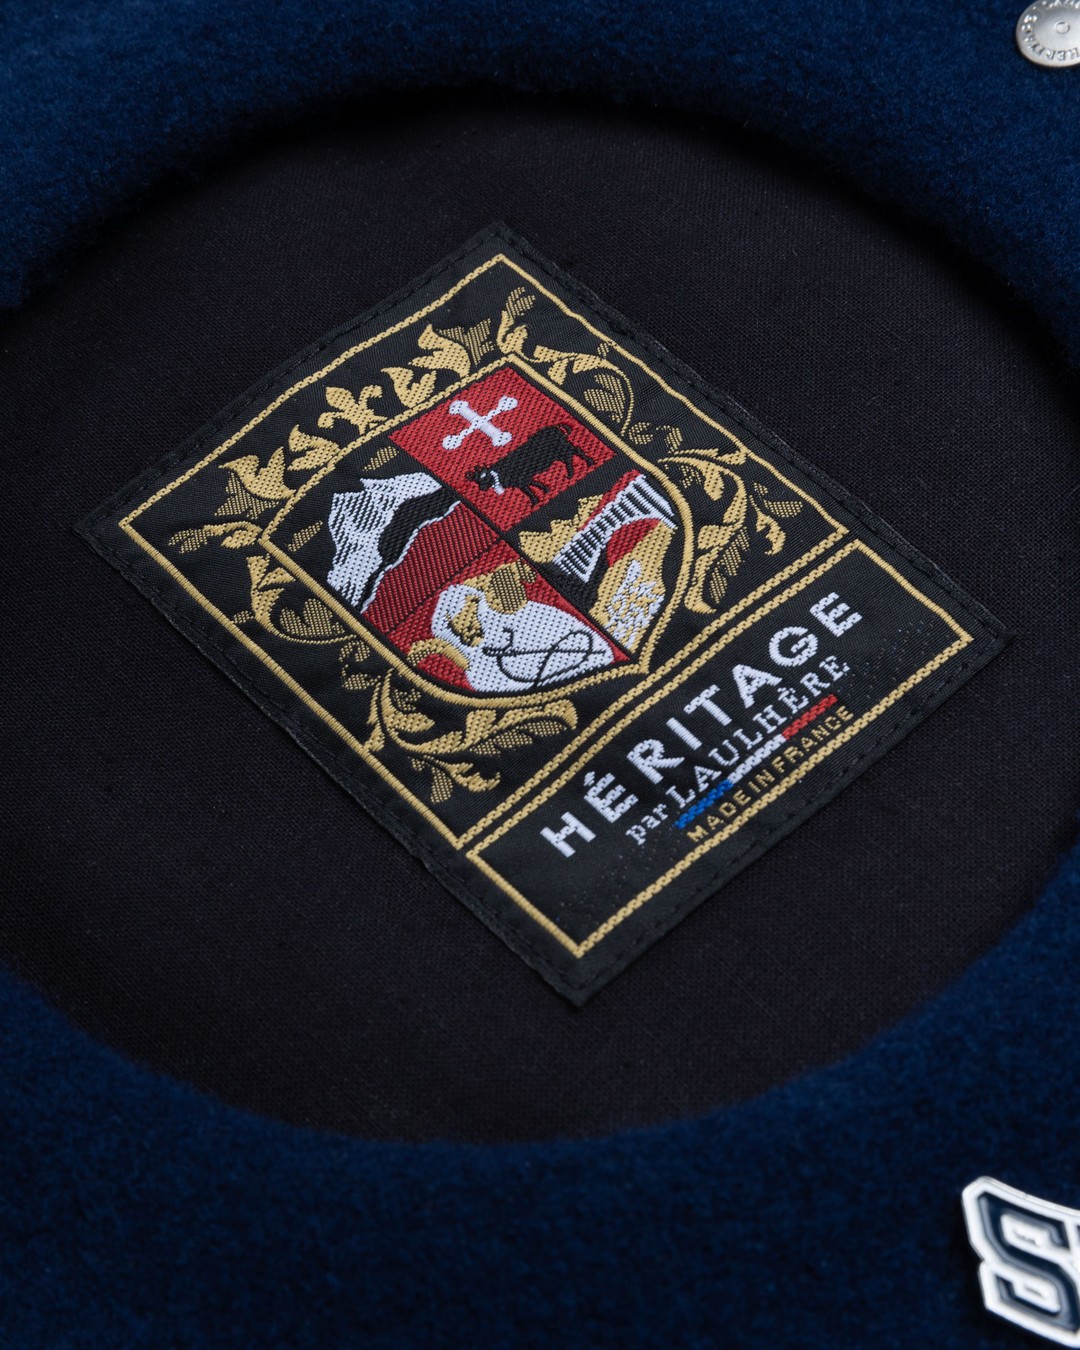 Highsnobiety – Not in Paris 5 Beret with Paris Pins - Hats - Blue - Image 6